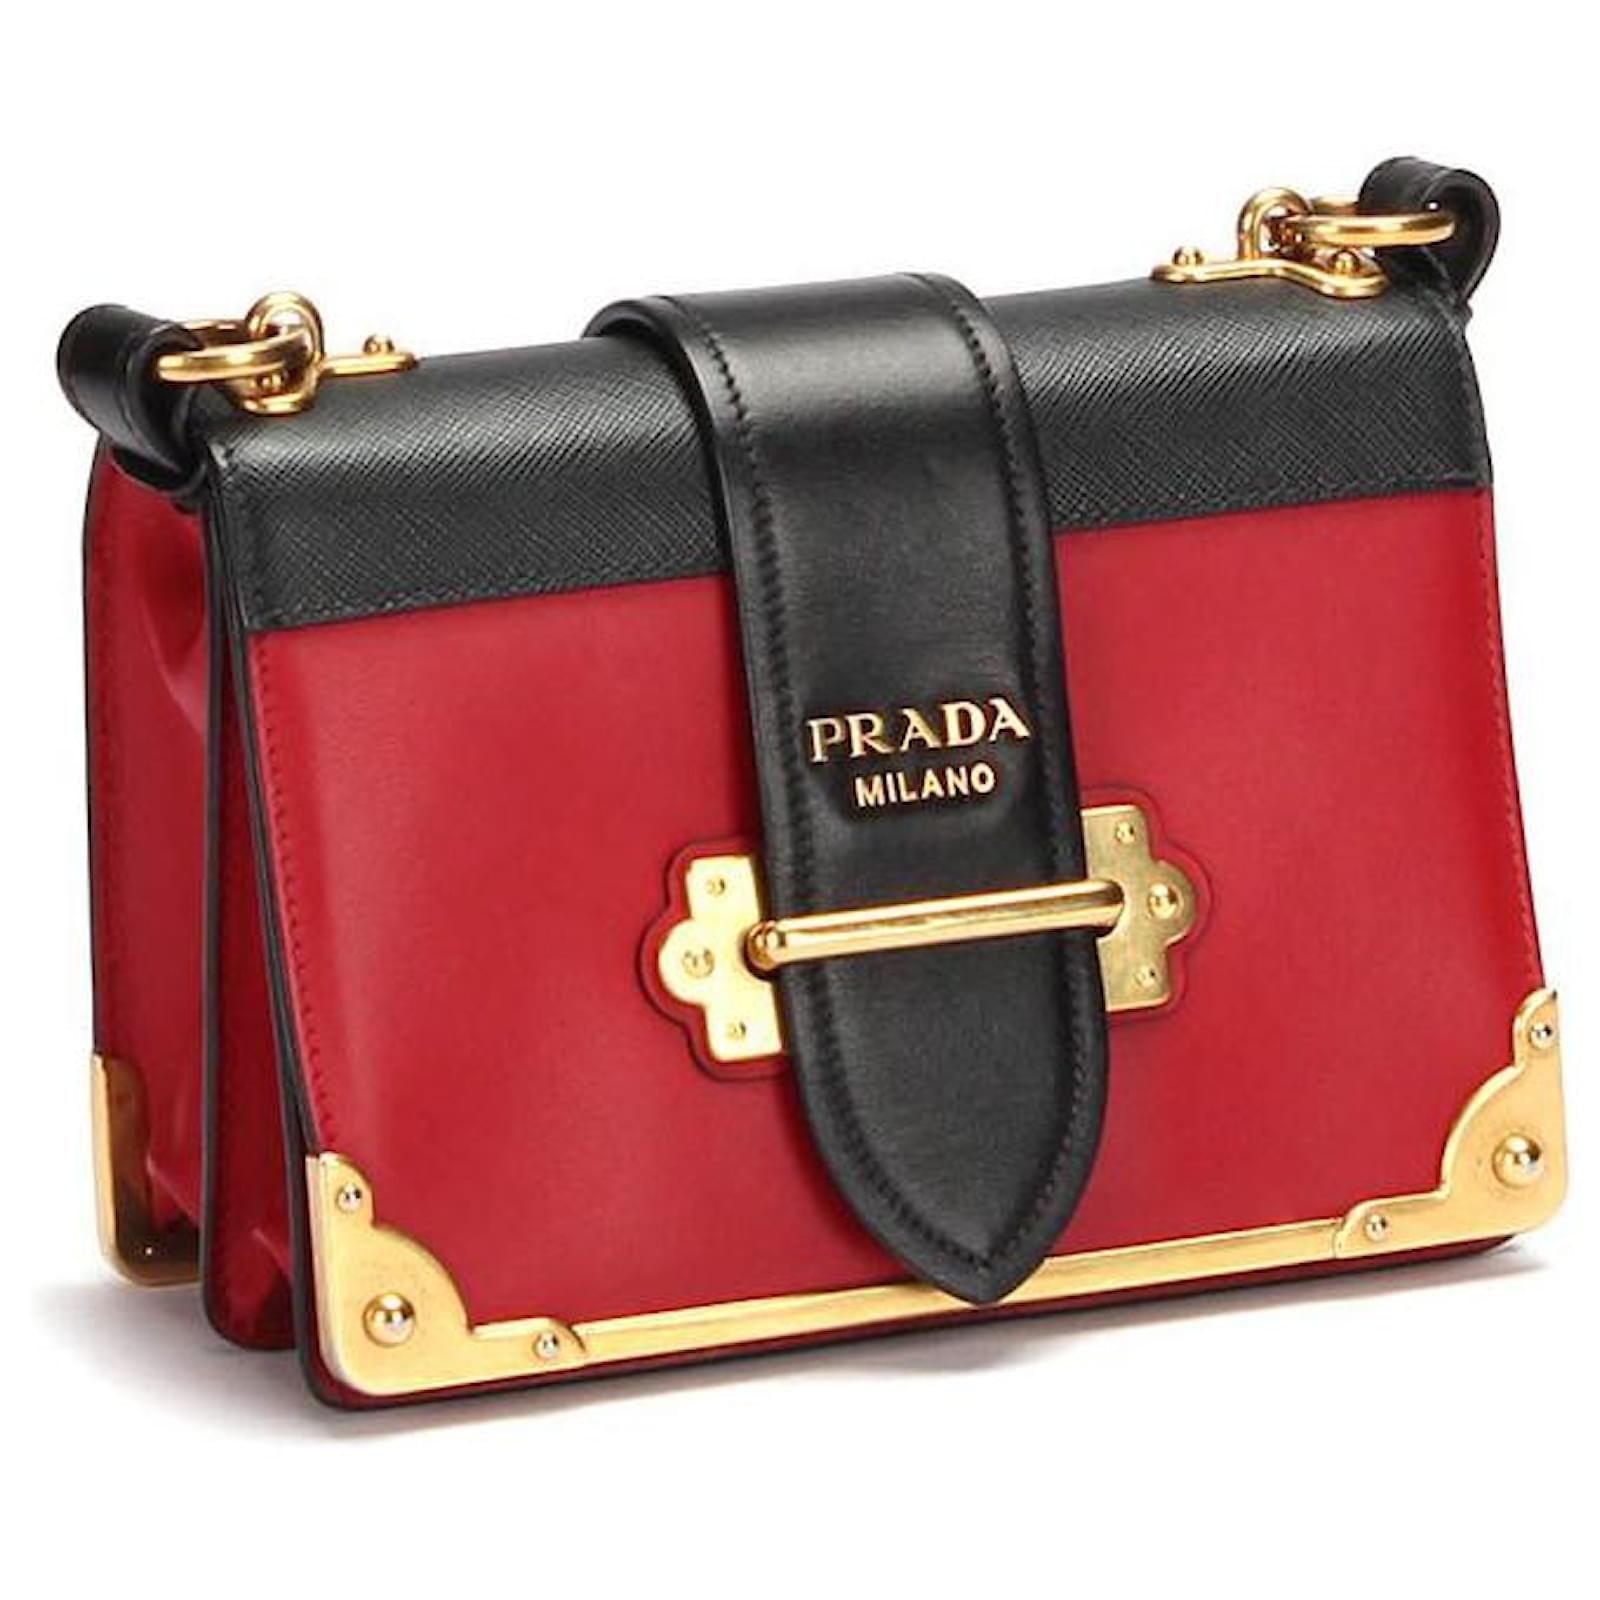 Prada Leather Cahier Crossbody Bag in red calf leather leather ref